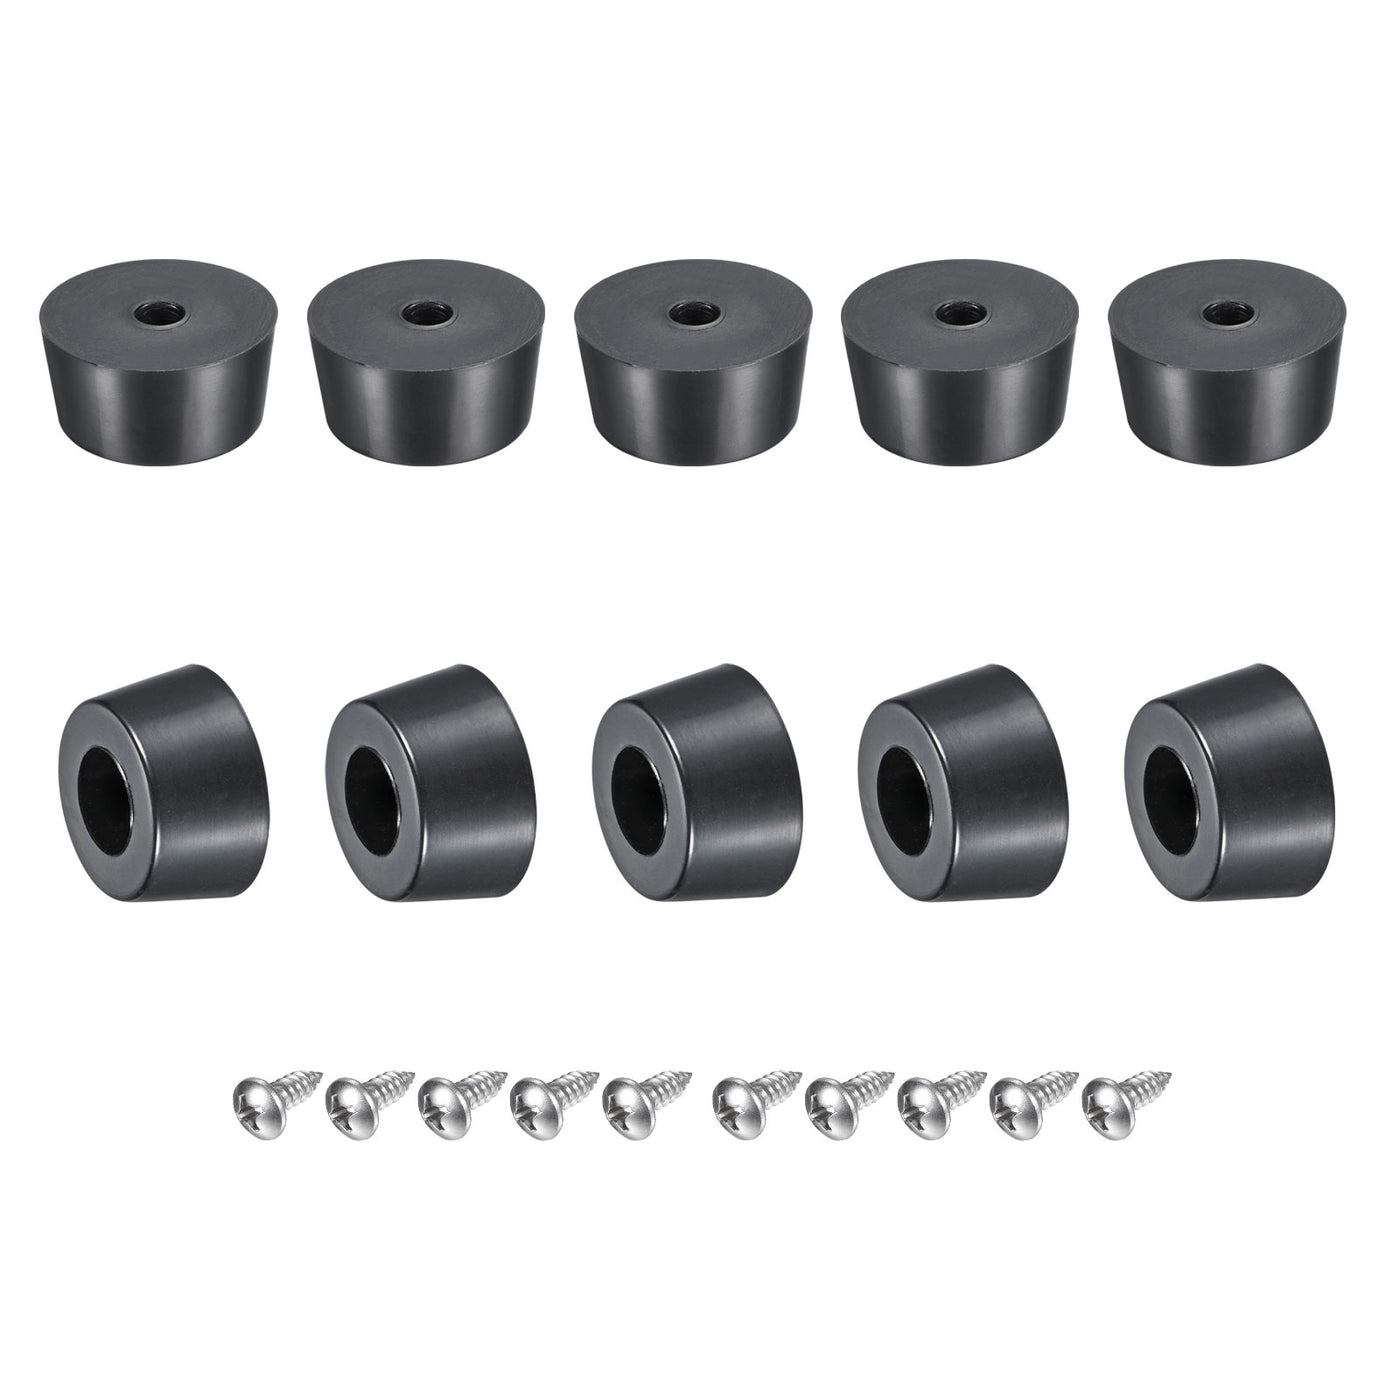 uxcell Uxcell Rubber Bumper Feet, 0.47" H x 0.98" W Round Pads with Stainless Steel Washer and Screws for Furniture, Appliances, Electronics 12 Pcs